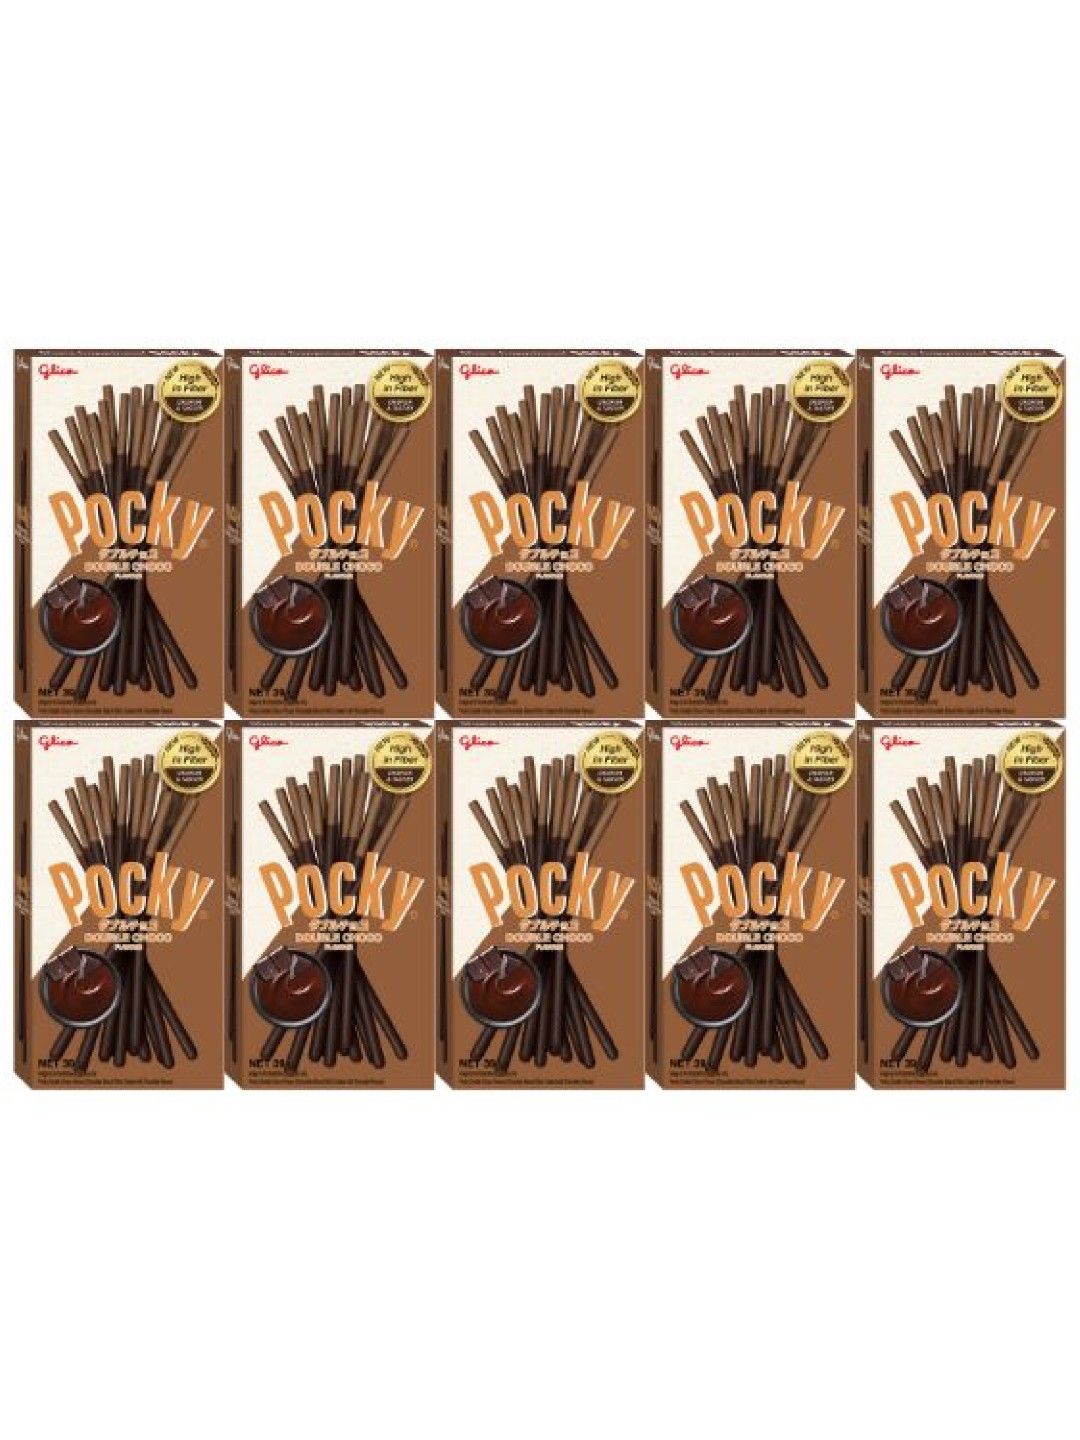 Pocky Double Choco Biscuit Sticks (Bundle of 10) (No Color- Image 1)